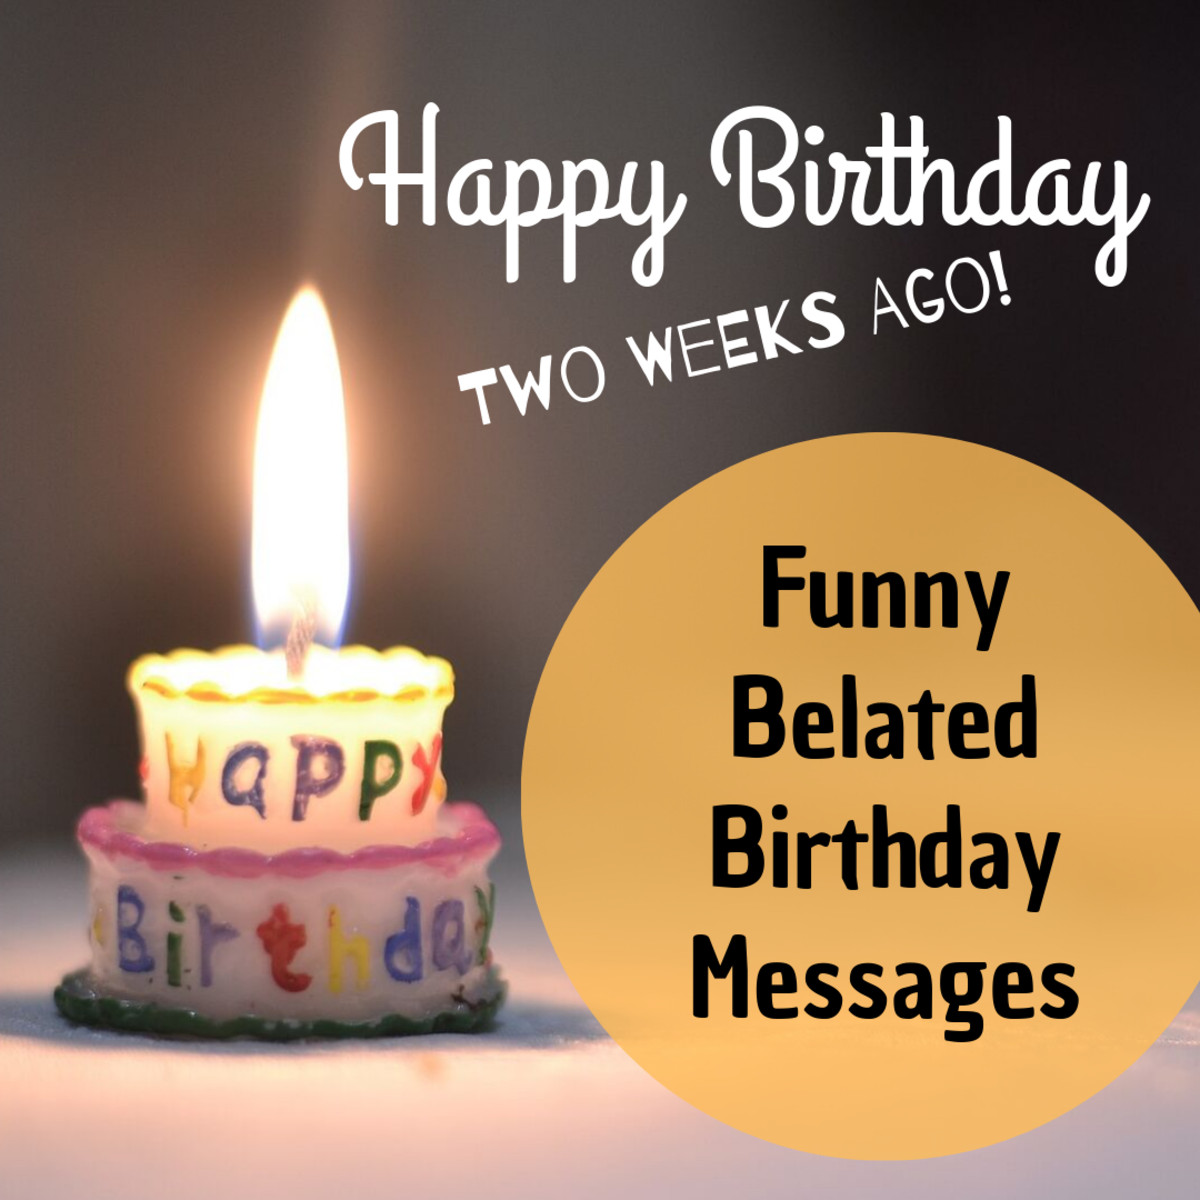 Funny Late Birthday Wishes
 Funny Belated Happy Birthday Wishes Late Messages and